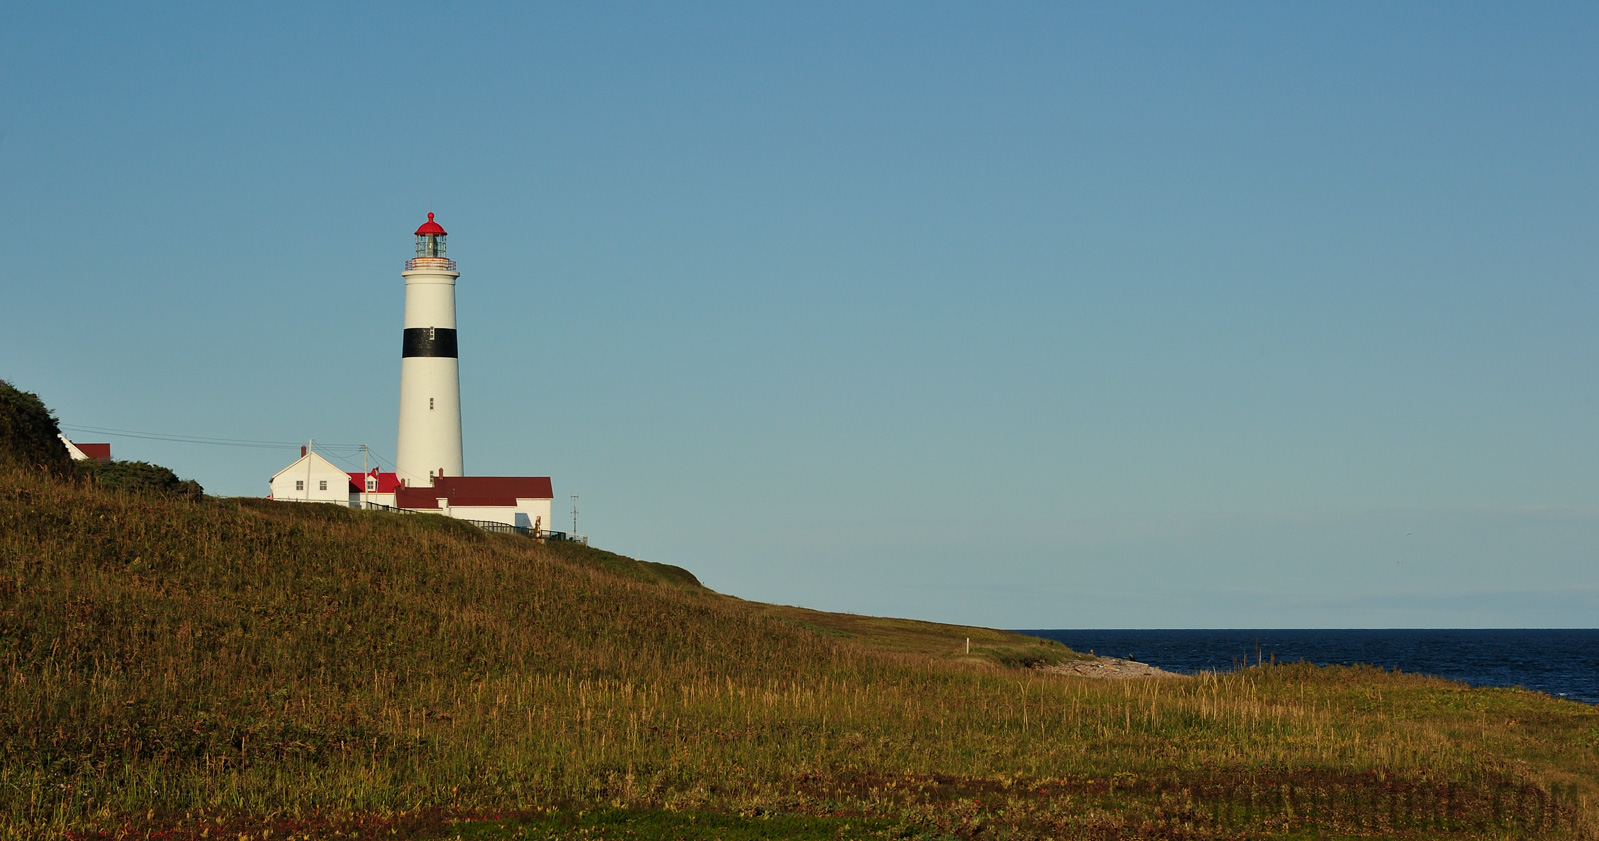 Second tallest lighthouse in Canada [92 mm, 1/800 sec at f / 10, ISO 400]